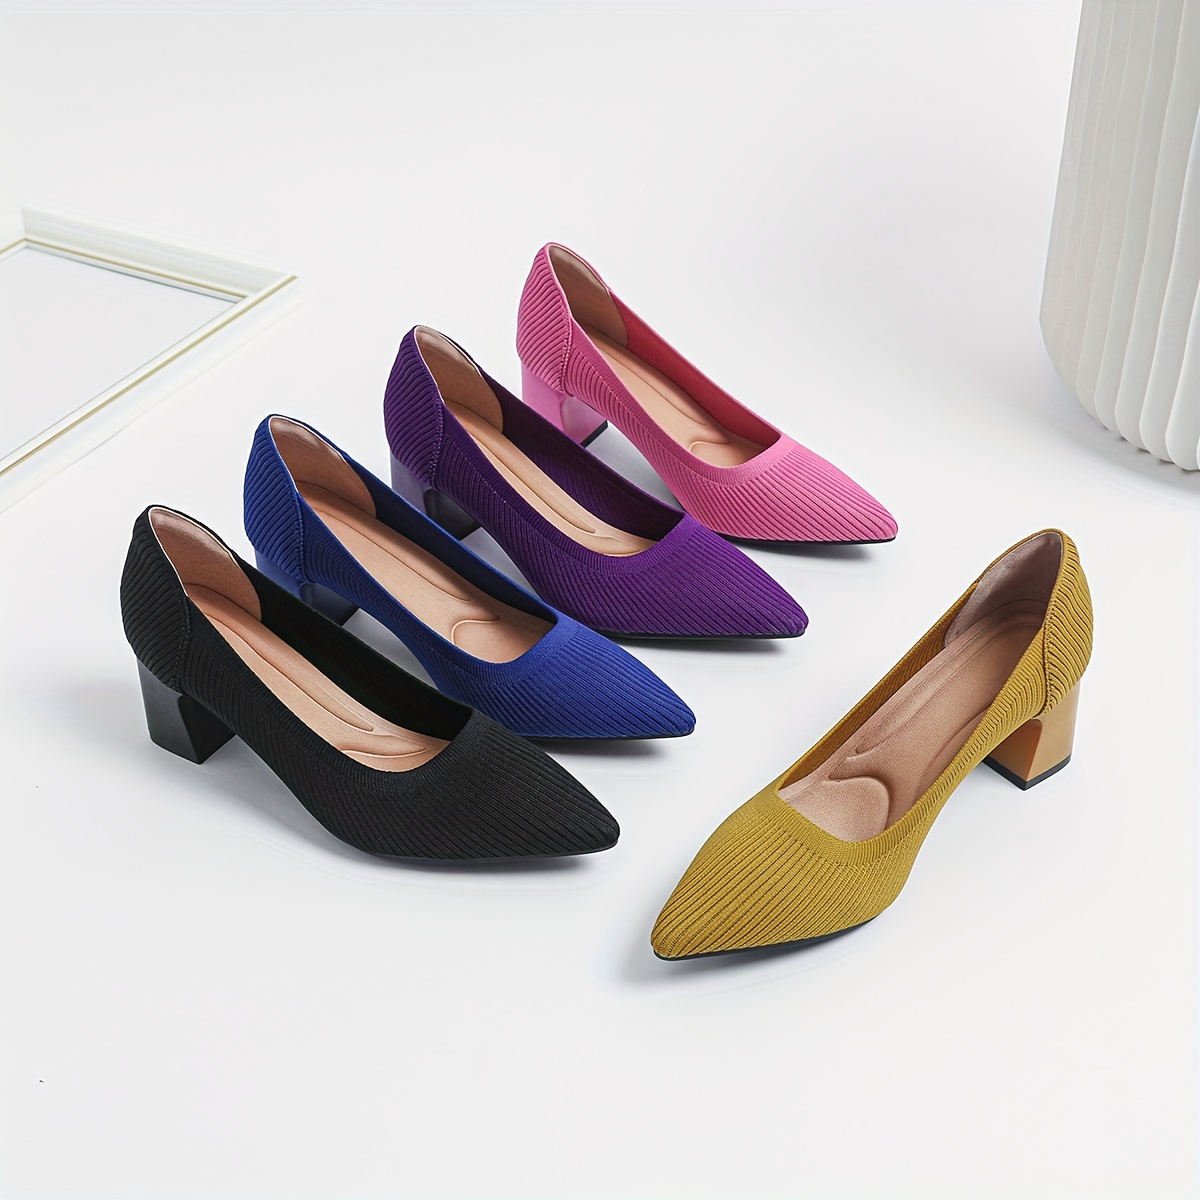 

Women's High Heeled Shoes, Breathable And Comfortable Pointed Toe, Elegant And Stylish For Formal Occasions